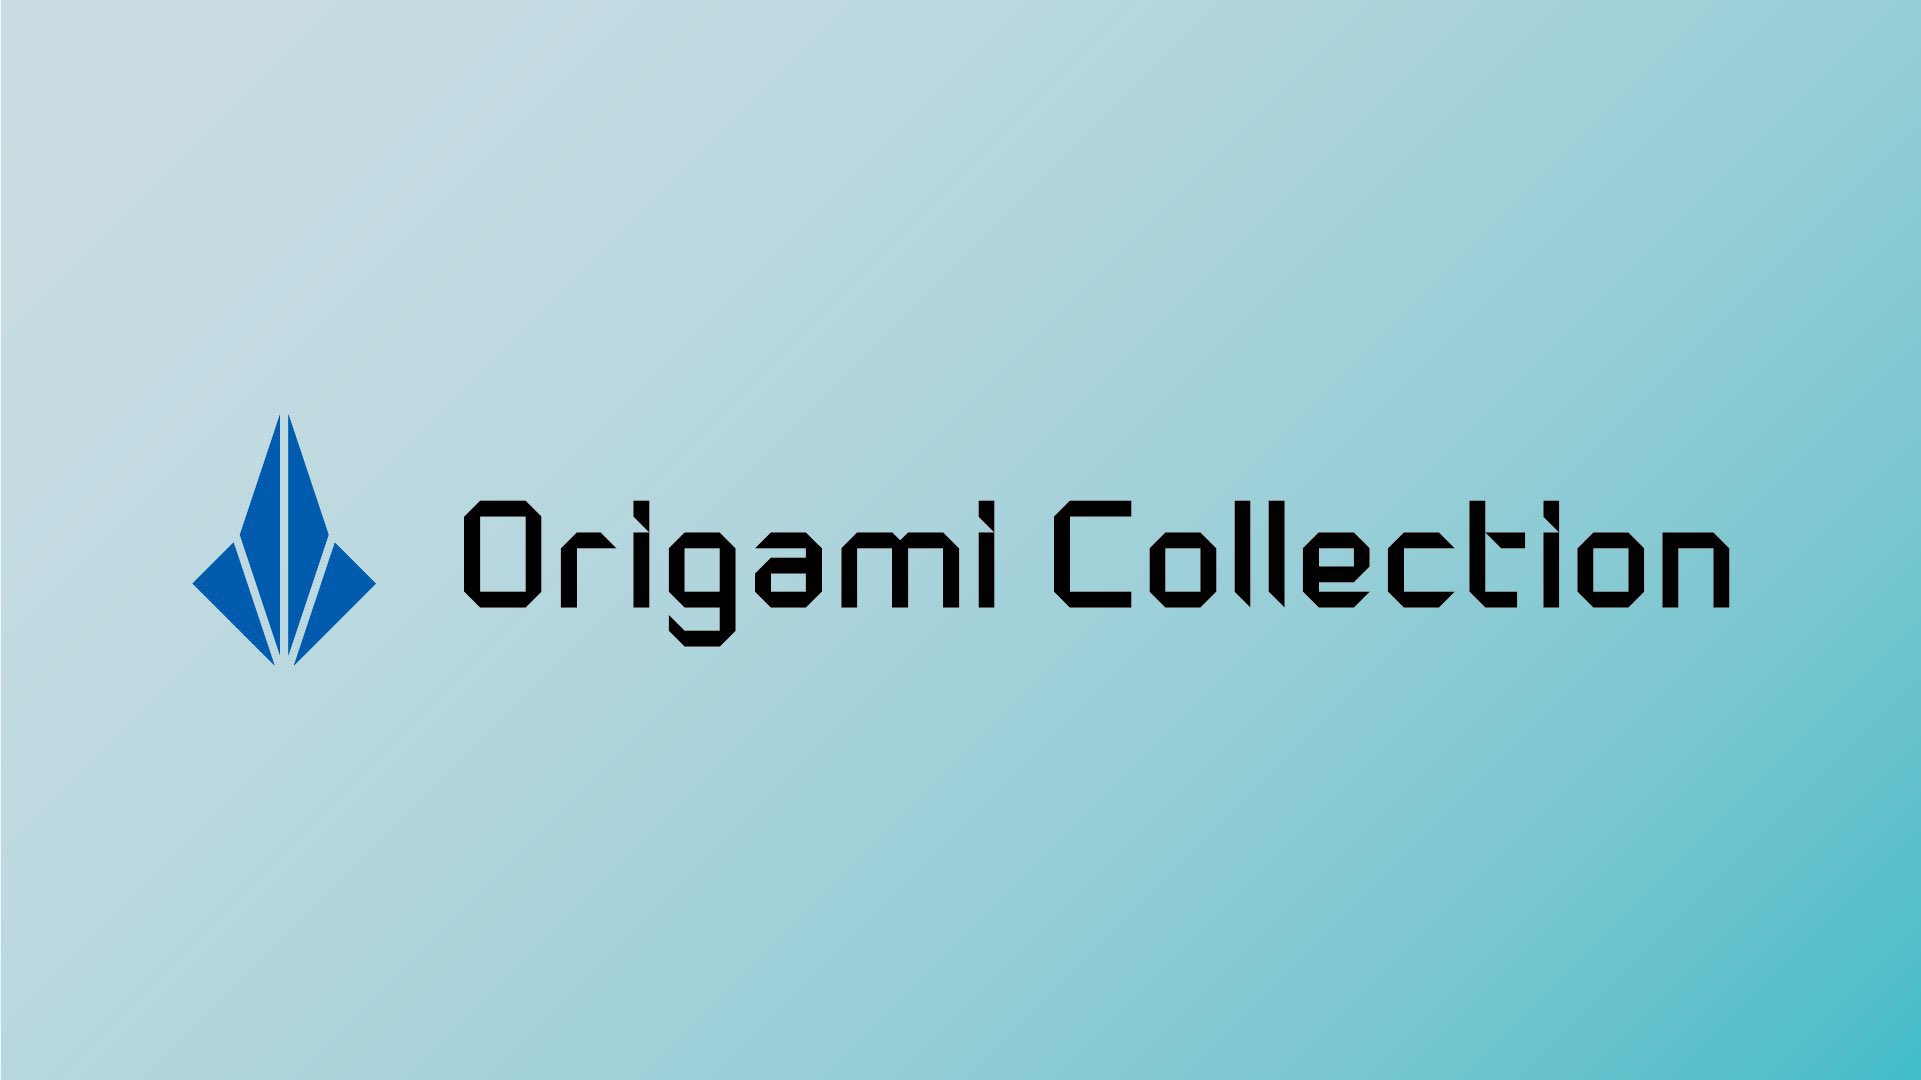 Origami_Collection Banner